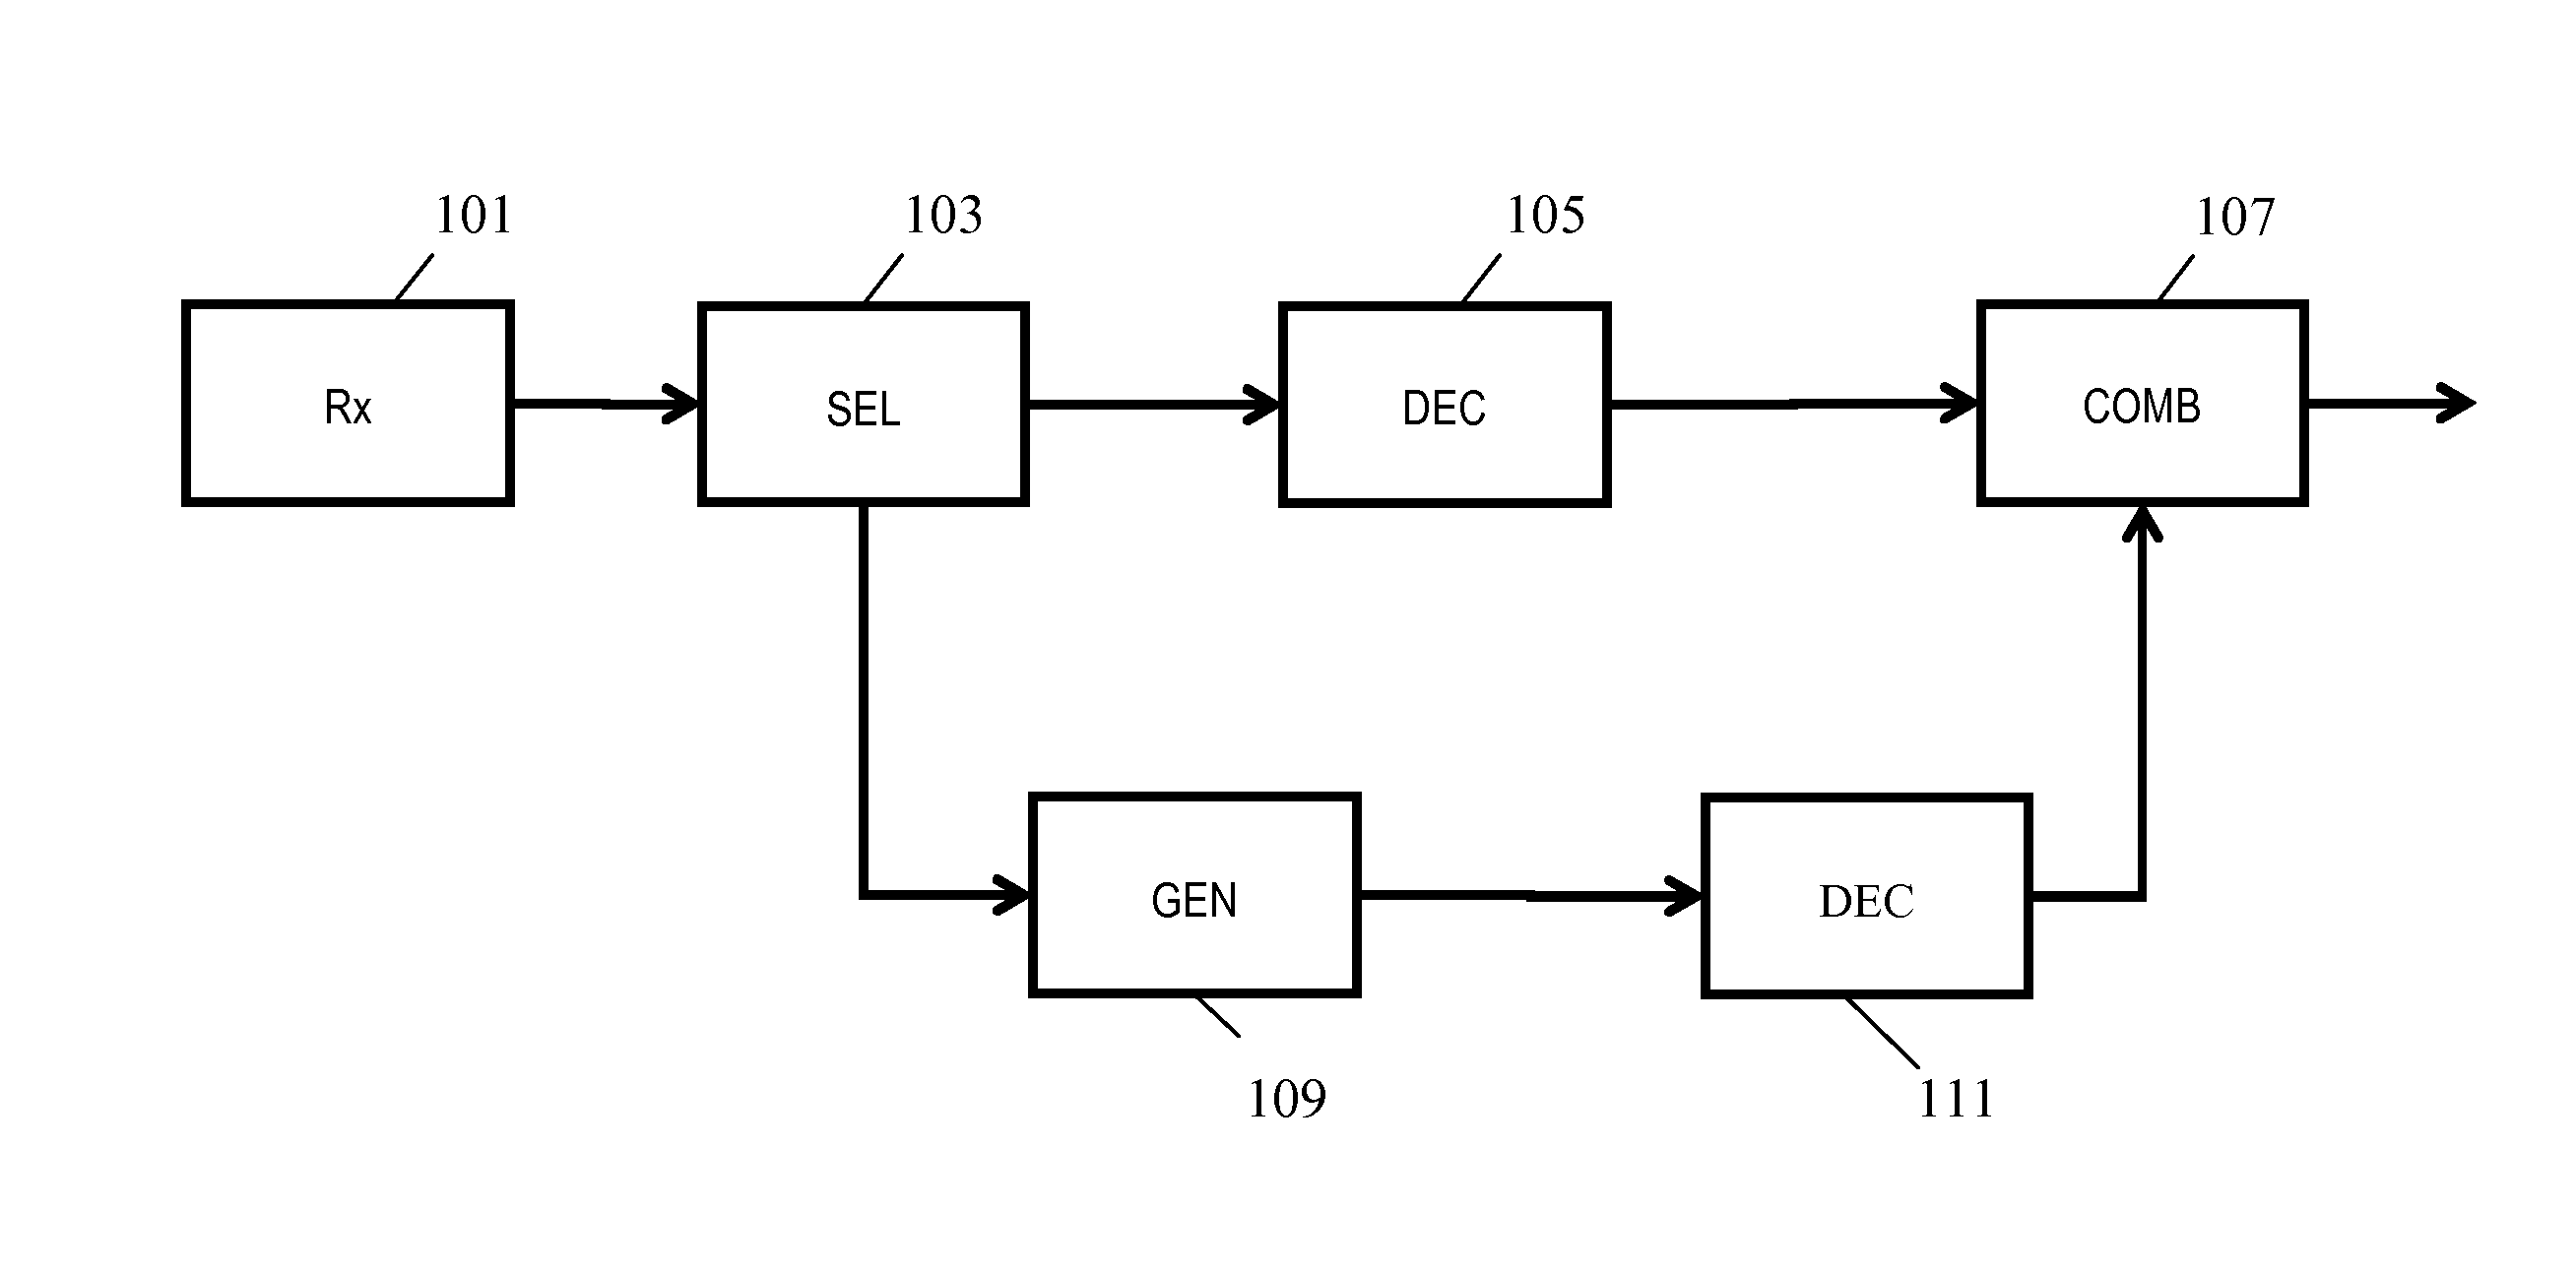 Audio signal processor for processing encoded mult-channel audio signals and method therefor